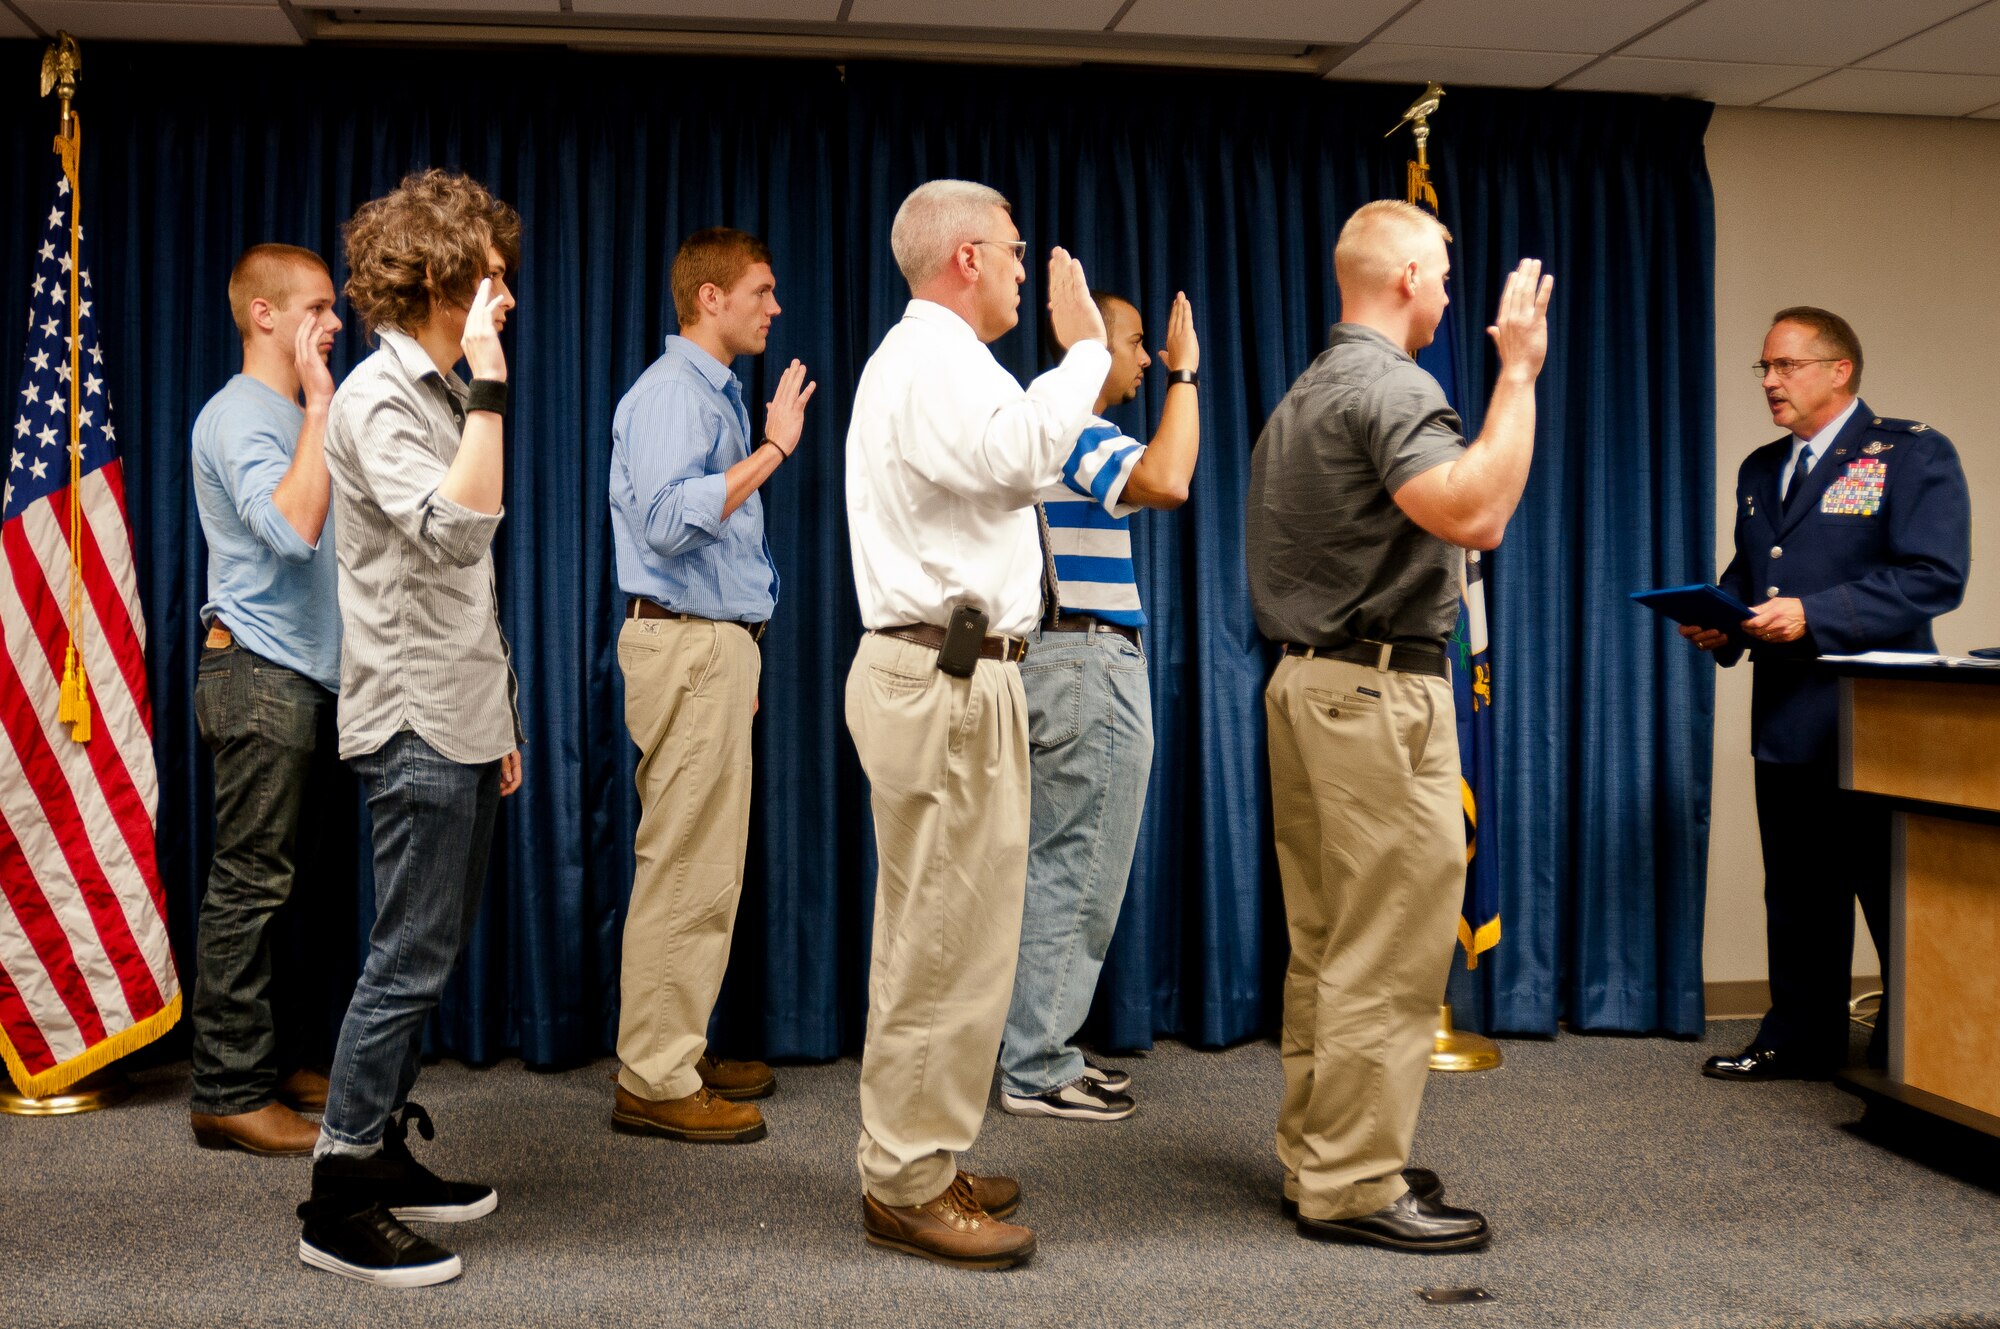 Col. Greg Nelson (right), commander of the Kentucky Air National Guard’s 123rd Airlift Wing, prepares to swear in eight new recruits at a mass-enlistment ceremony held Sept. 20, 2011, at the wing’s Louisville, Ky., air base. The unit flies C-130 aircraft and provides intra-theater airlift in support of homeland security, disaster response and military operations around the world. The new recruits will be trained for a broad spectrum of responsibilities, from public affairs to aircrew duty. (U.S. Air Force photo by Master Sgt. Philip Speck)